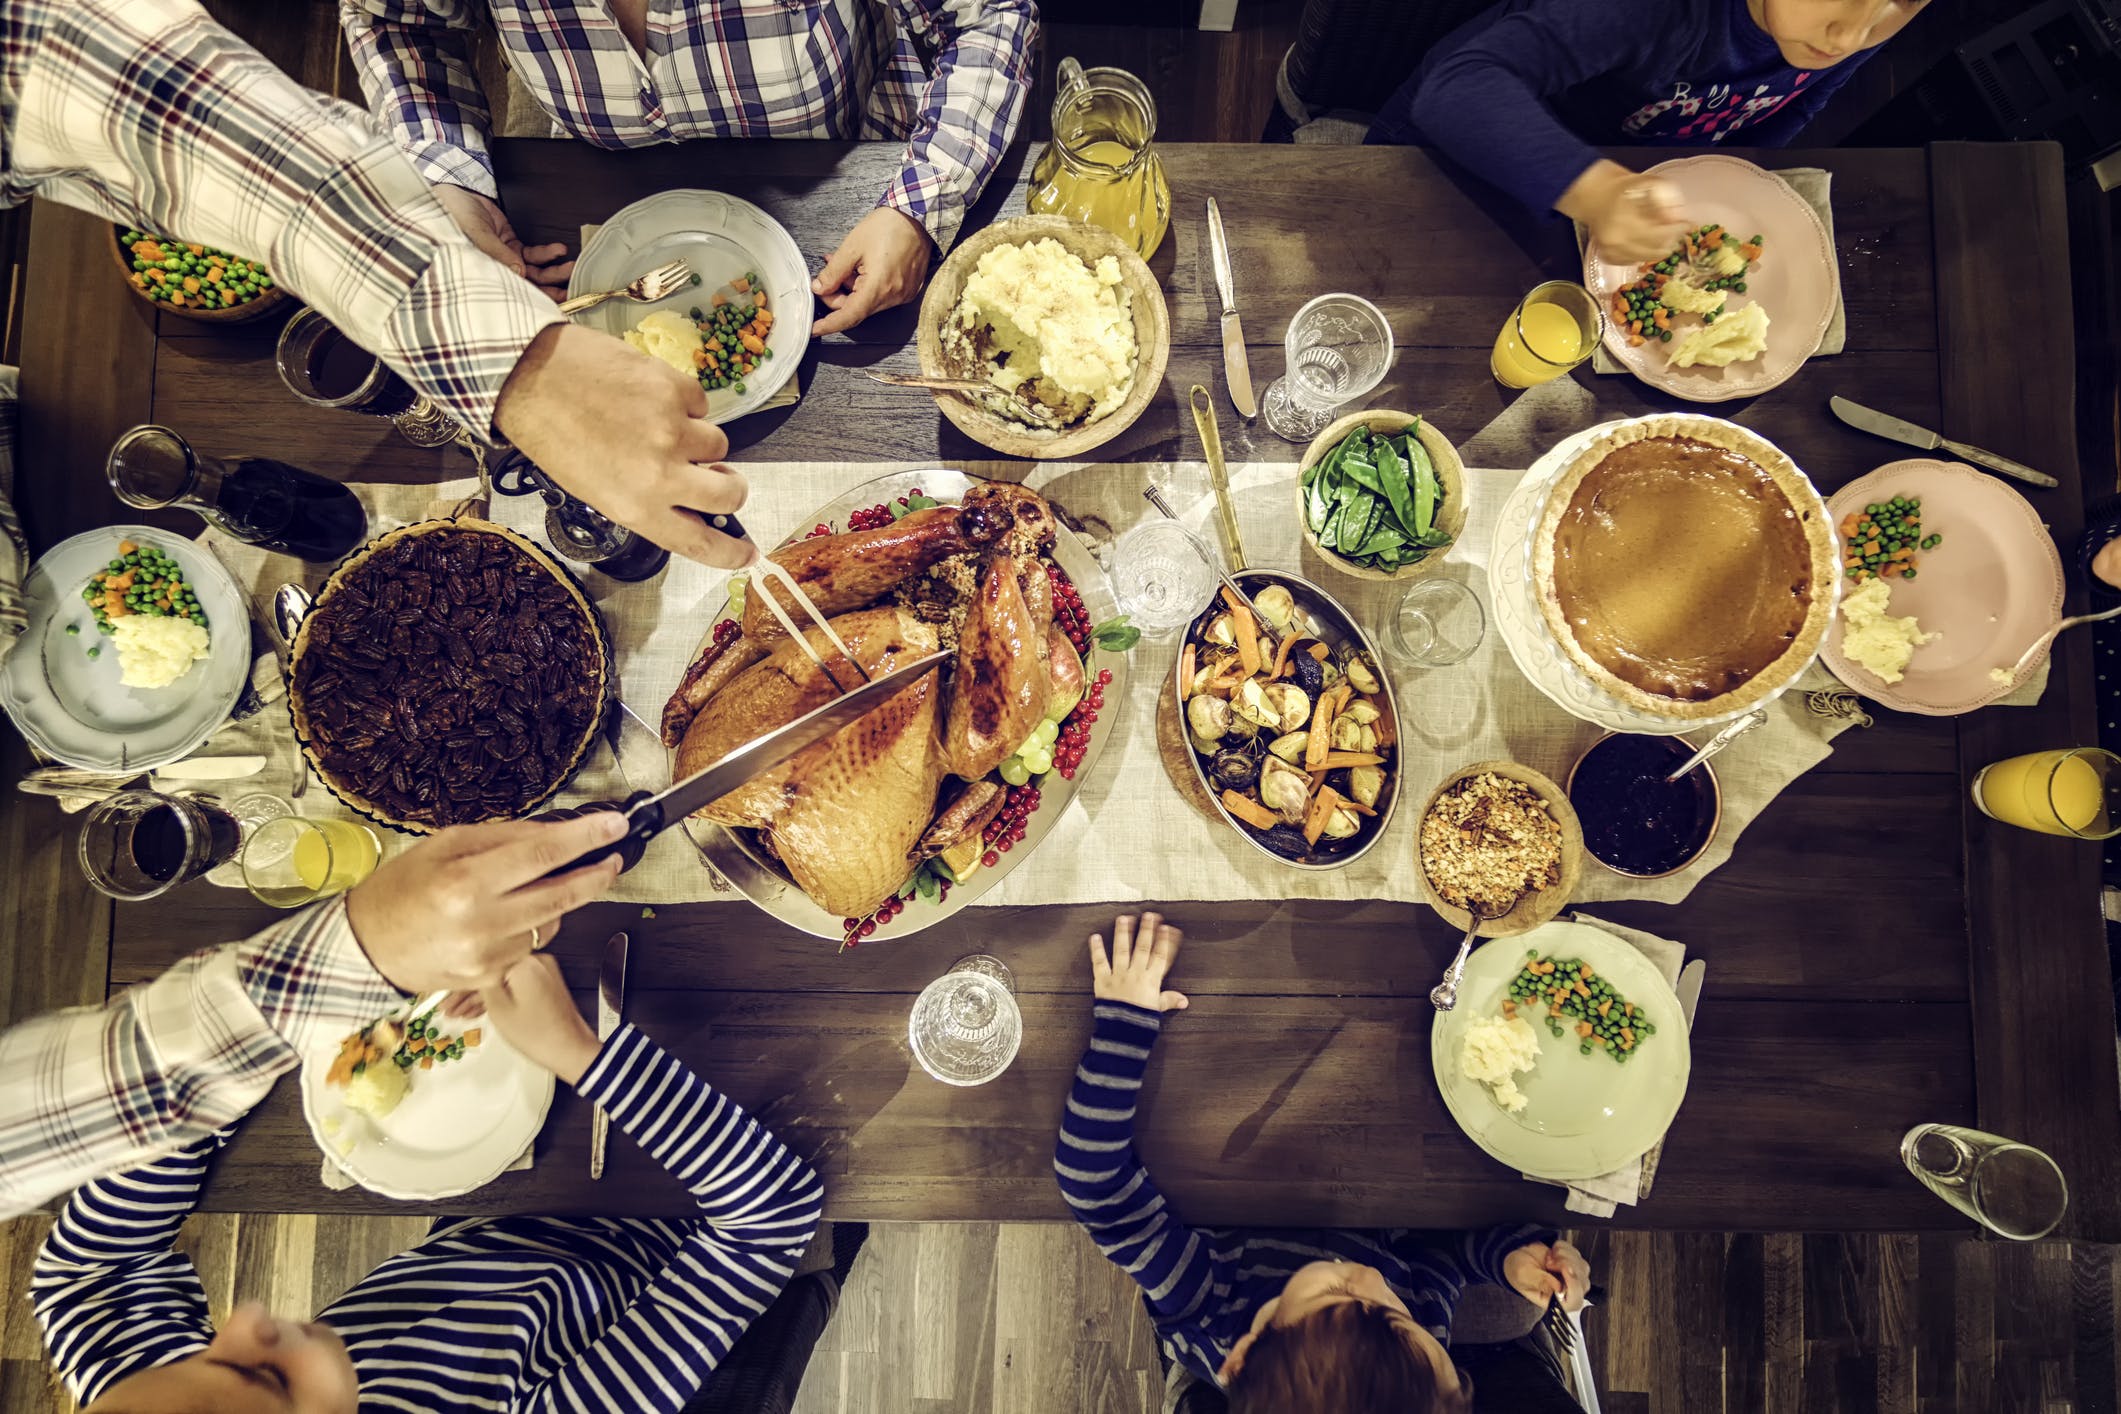 Turkey Day Tips to Keep You from Tipping the Scale